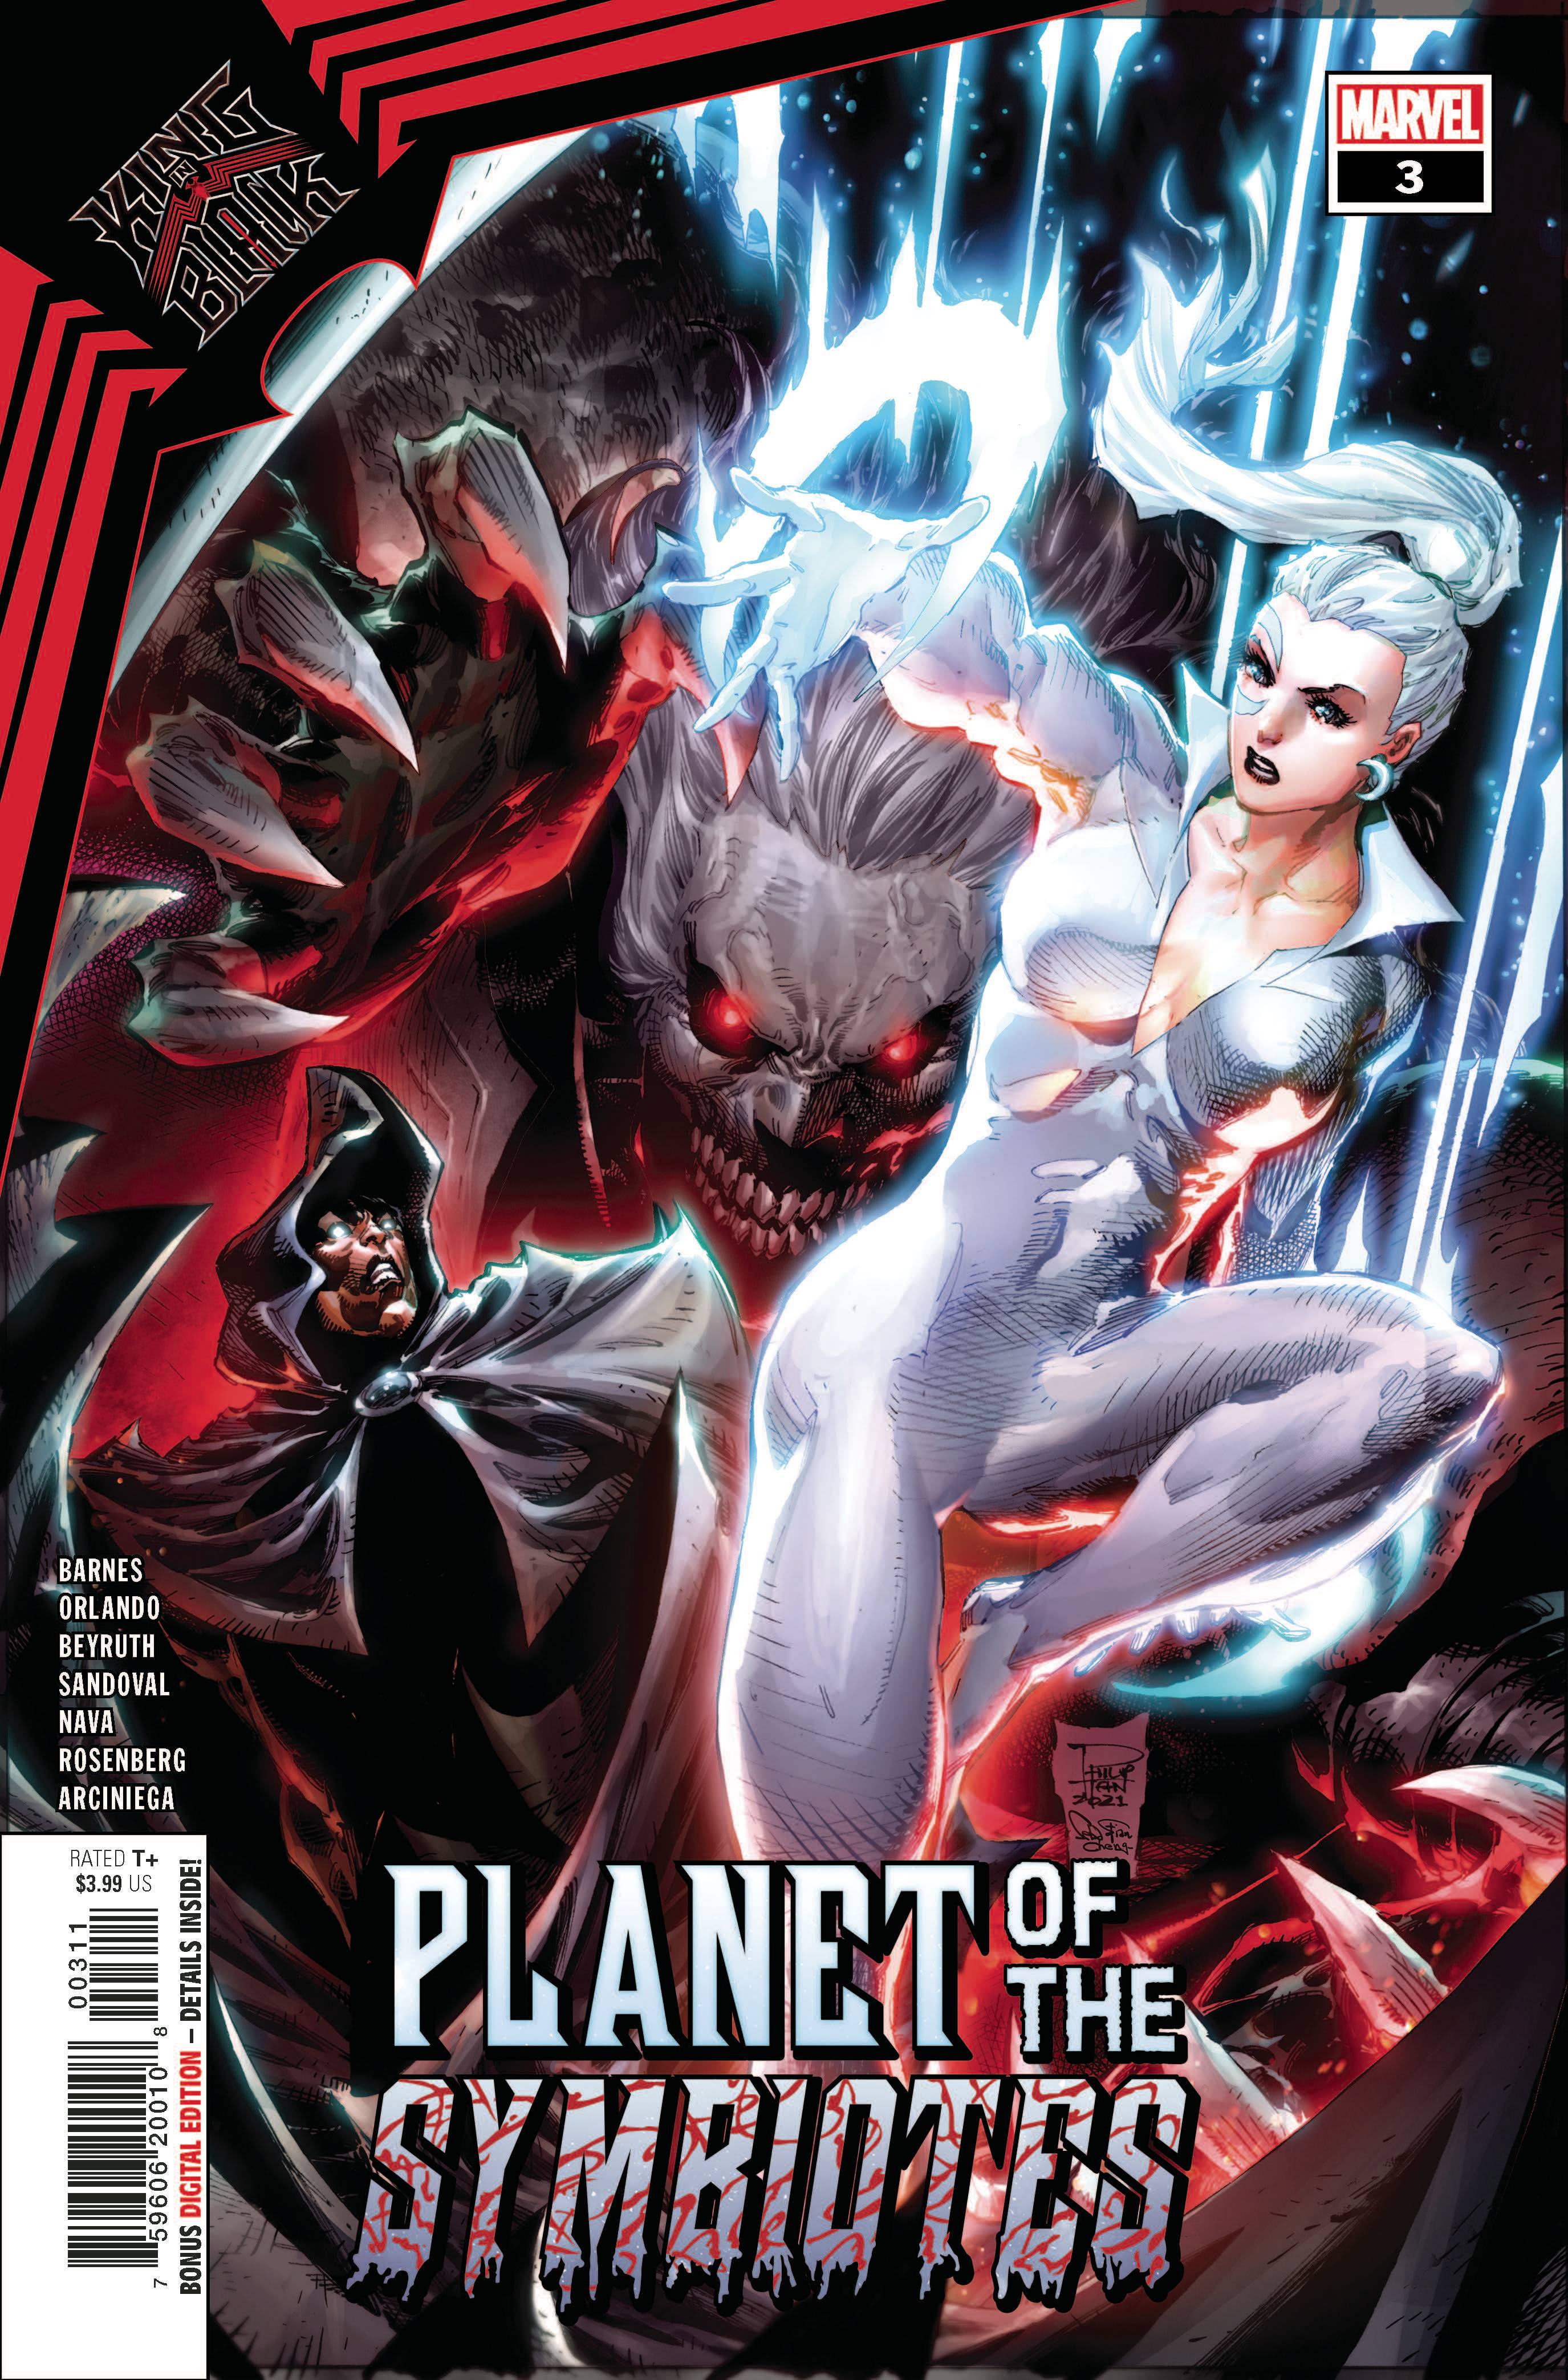 KING IN BLACK PLANET OF SYMBIOTES #3 (OF 3)